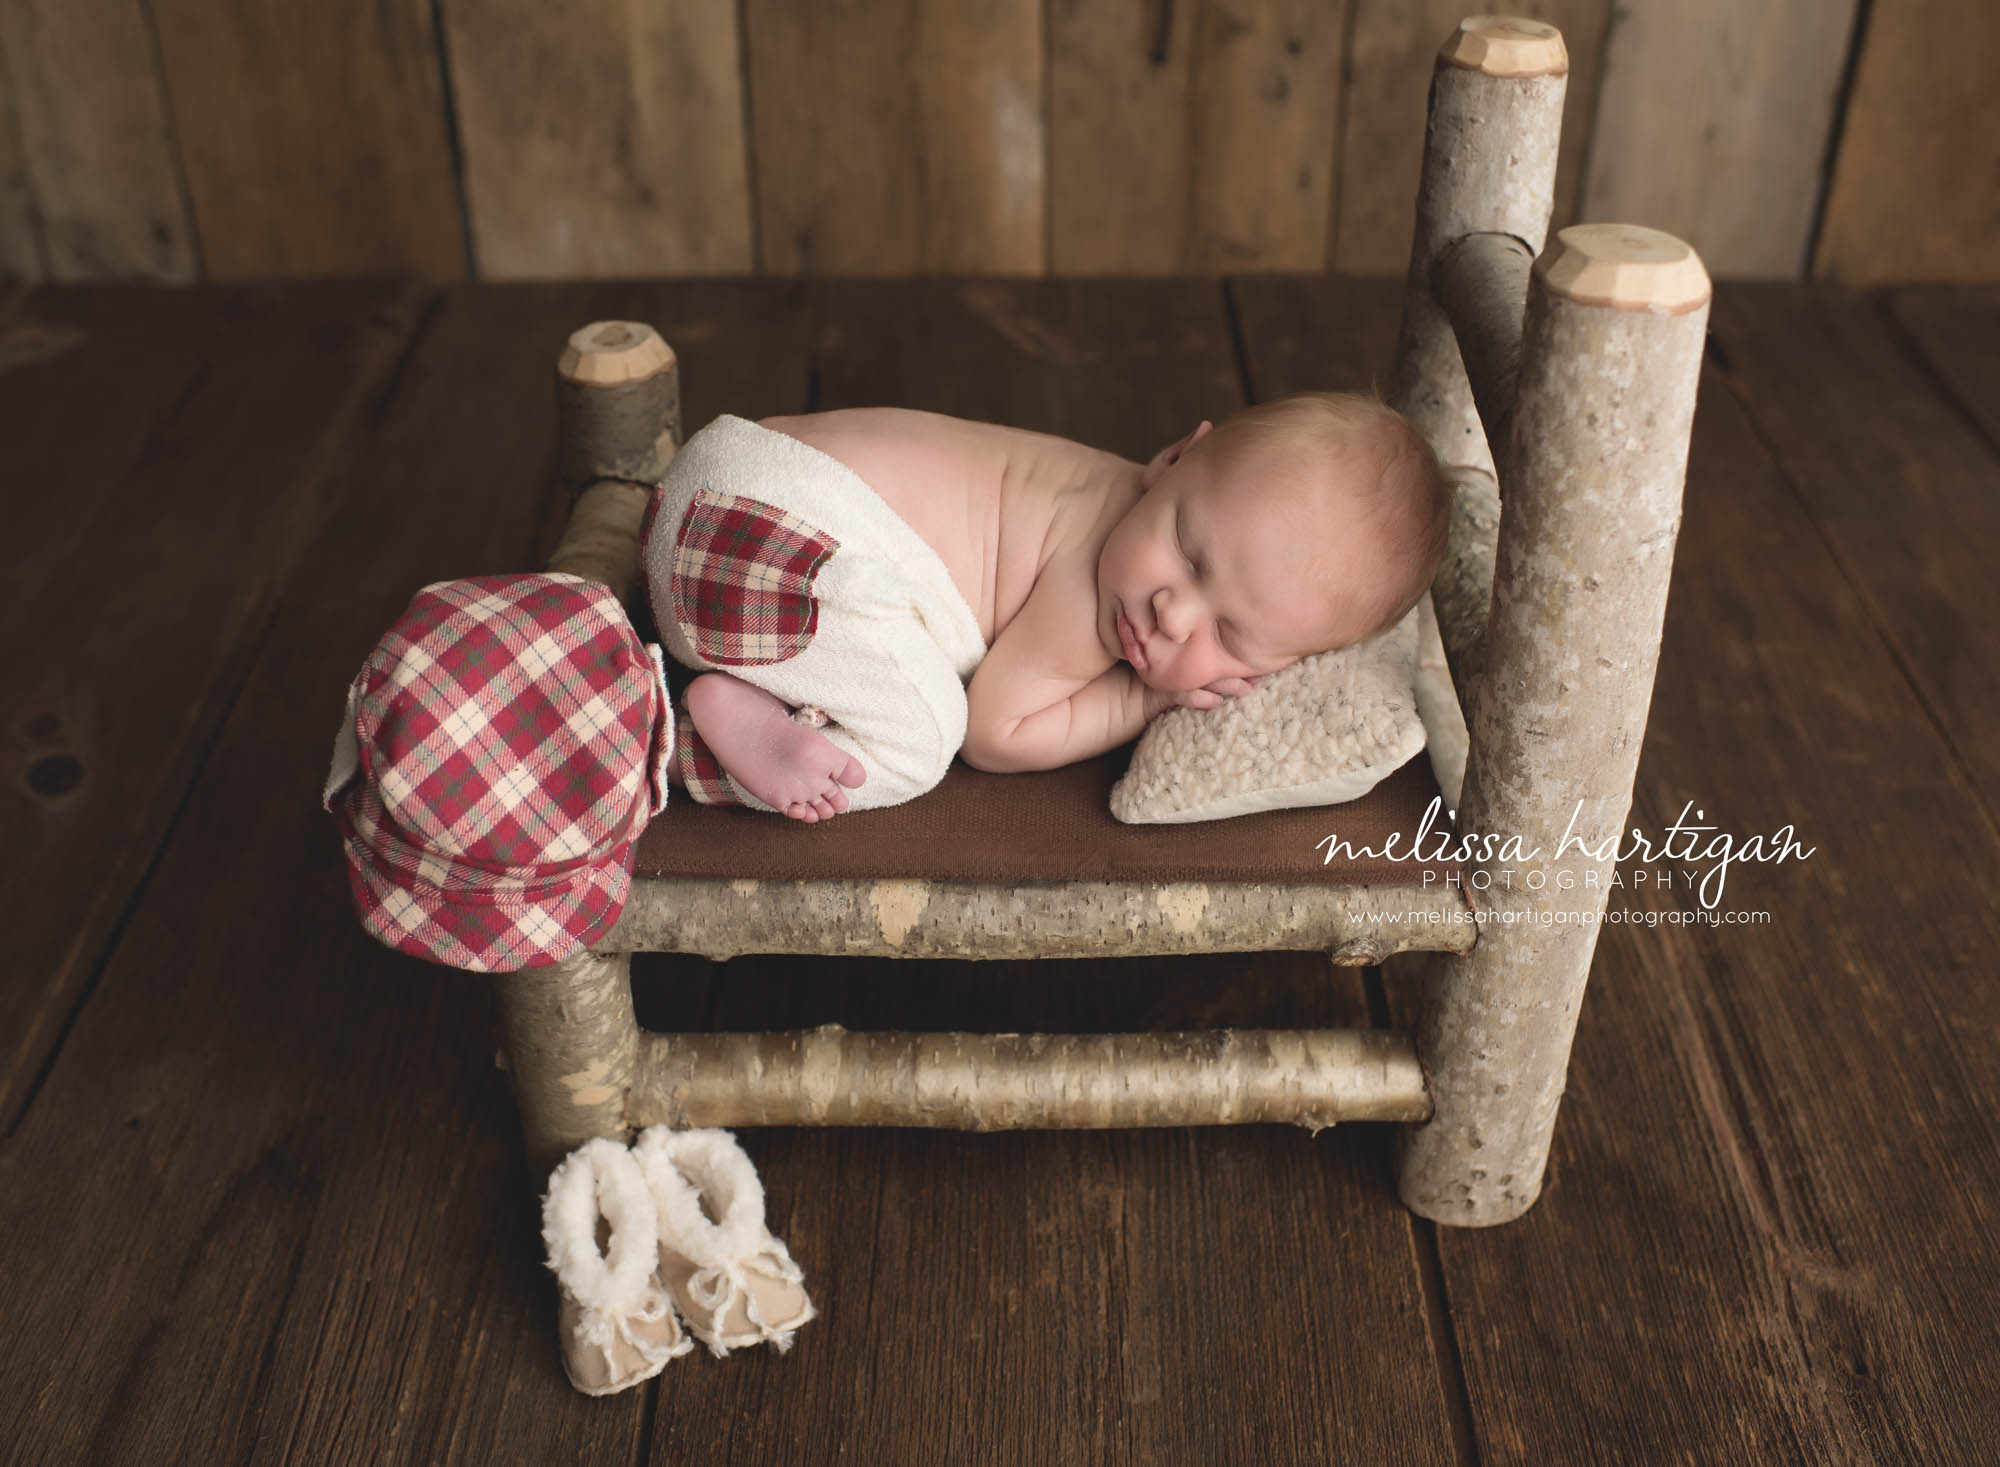 CT Baby Photography newborn boy sleeping in rustic bed with plaid pants and hat